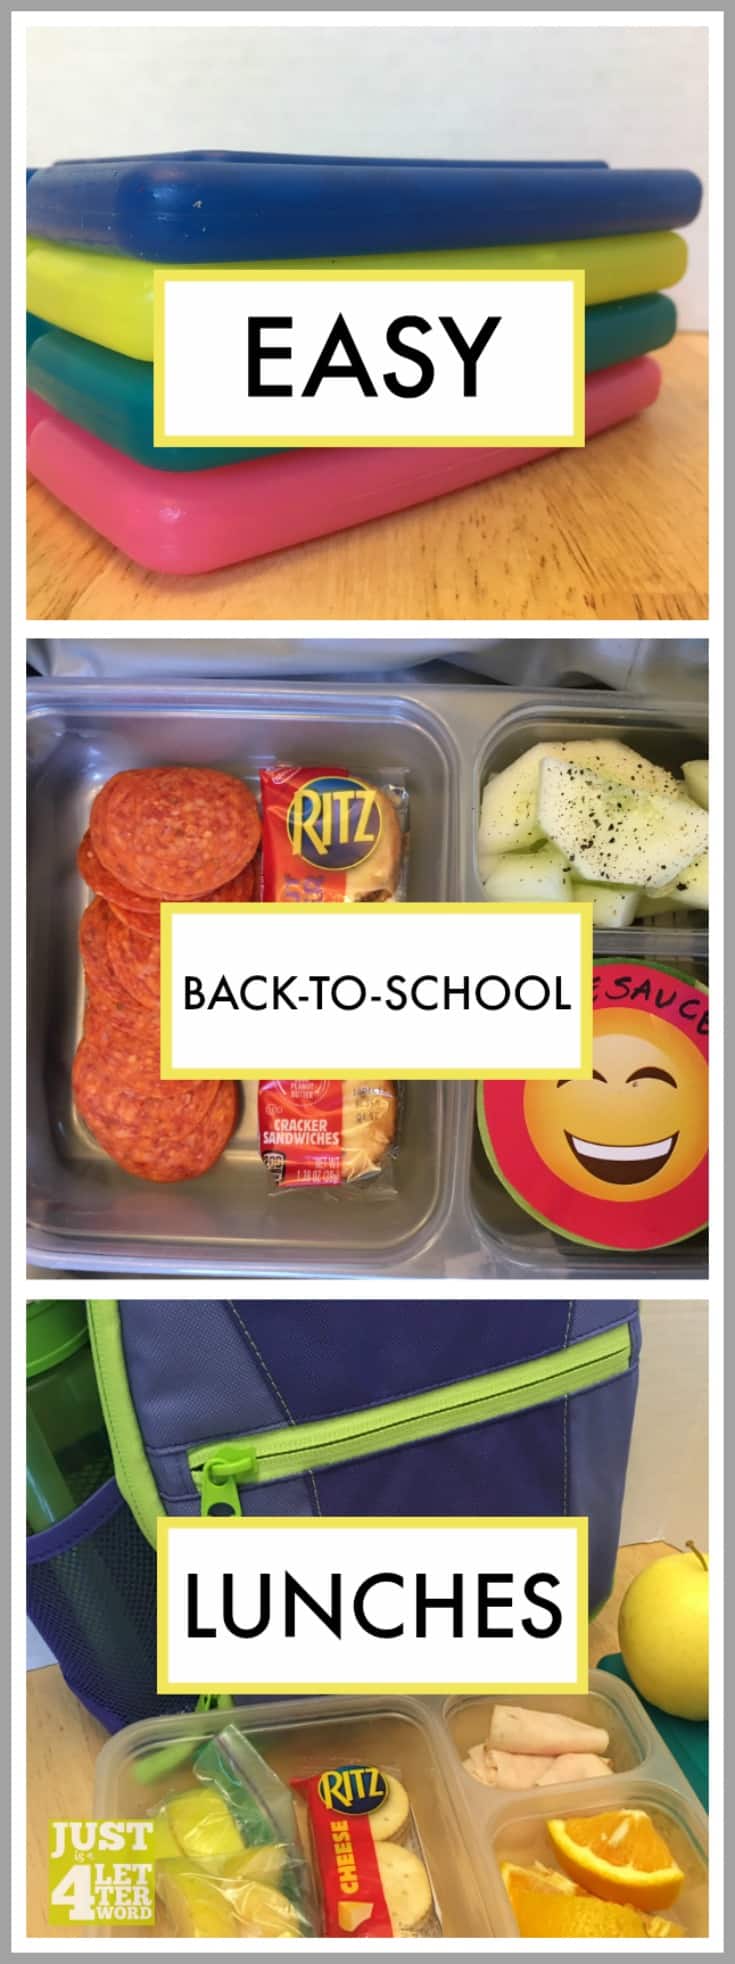 Back to school lunch hacks for quick and easy lunches kids can help make. Here's to smooth mornings all school year long!